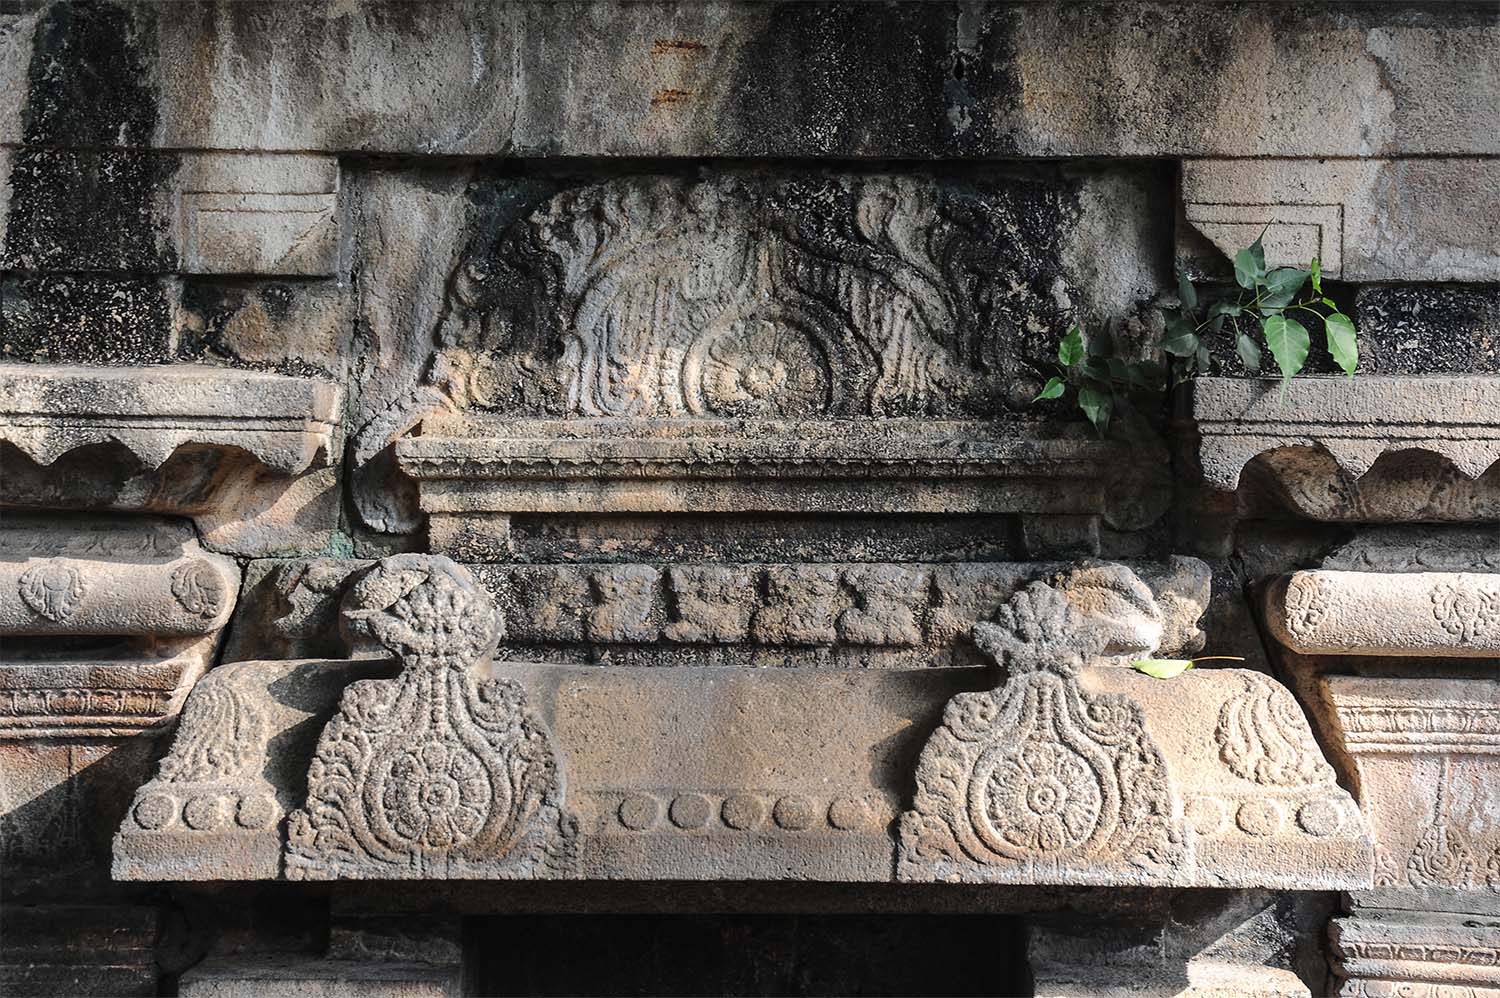 Department of Archaeology, Tamil Nadu (Monument)